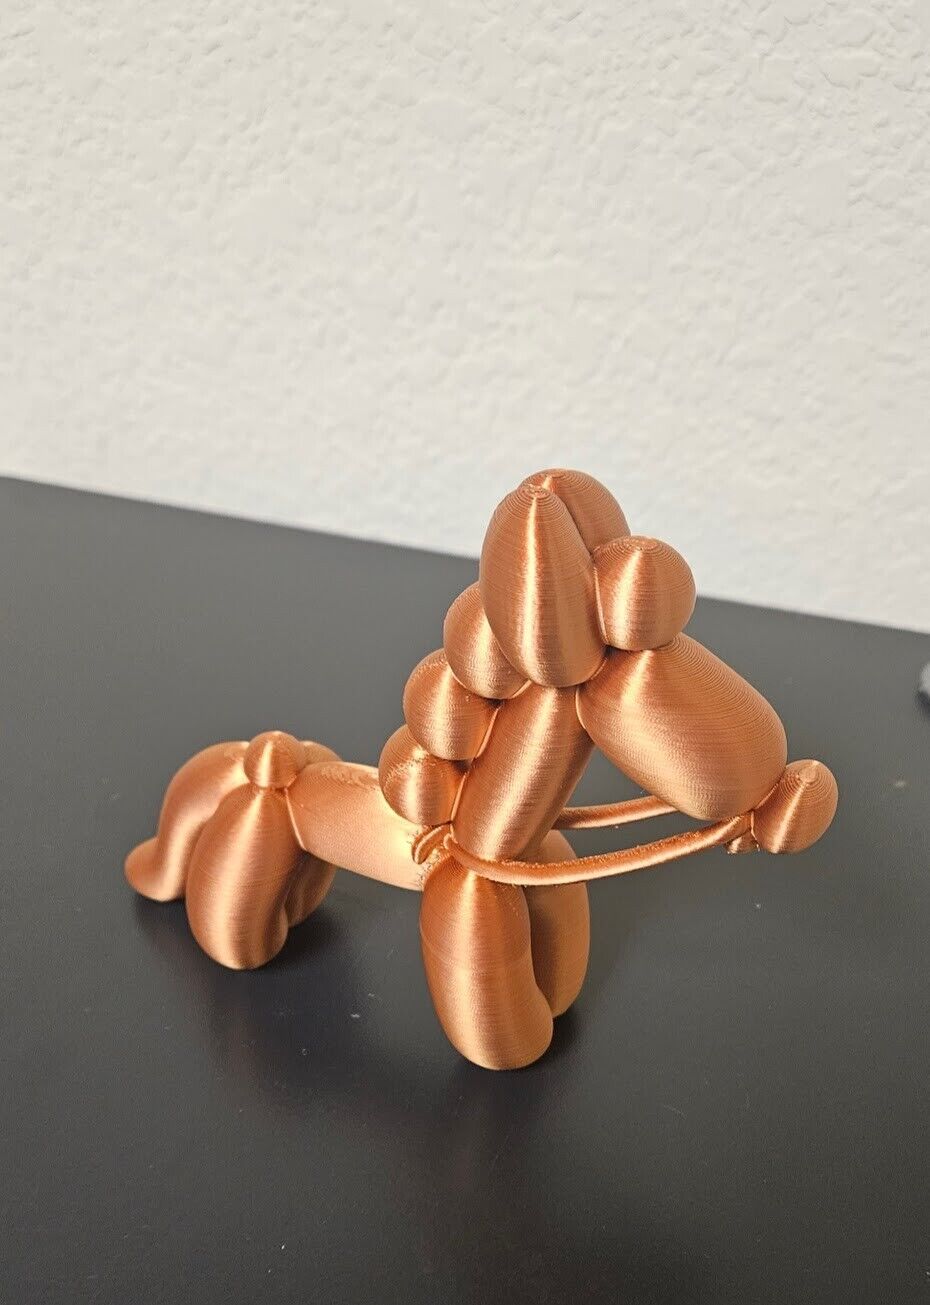 Balloon animal horse - shimmering copper color - 6 inches